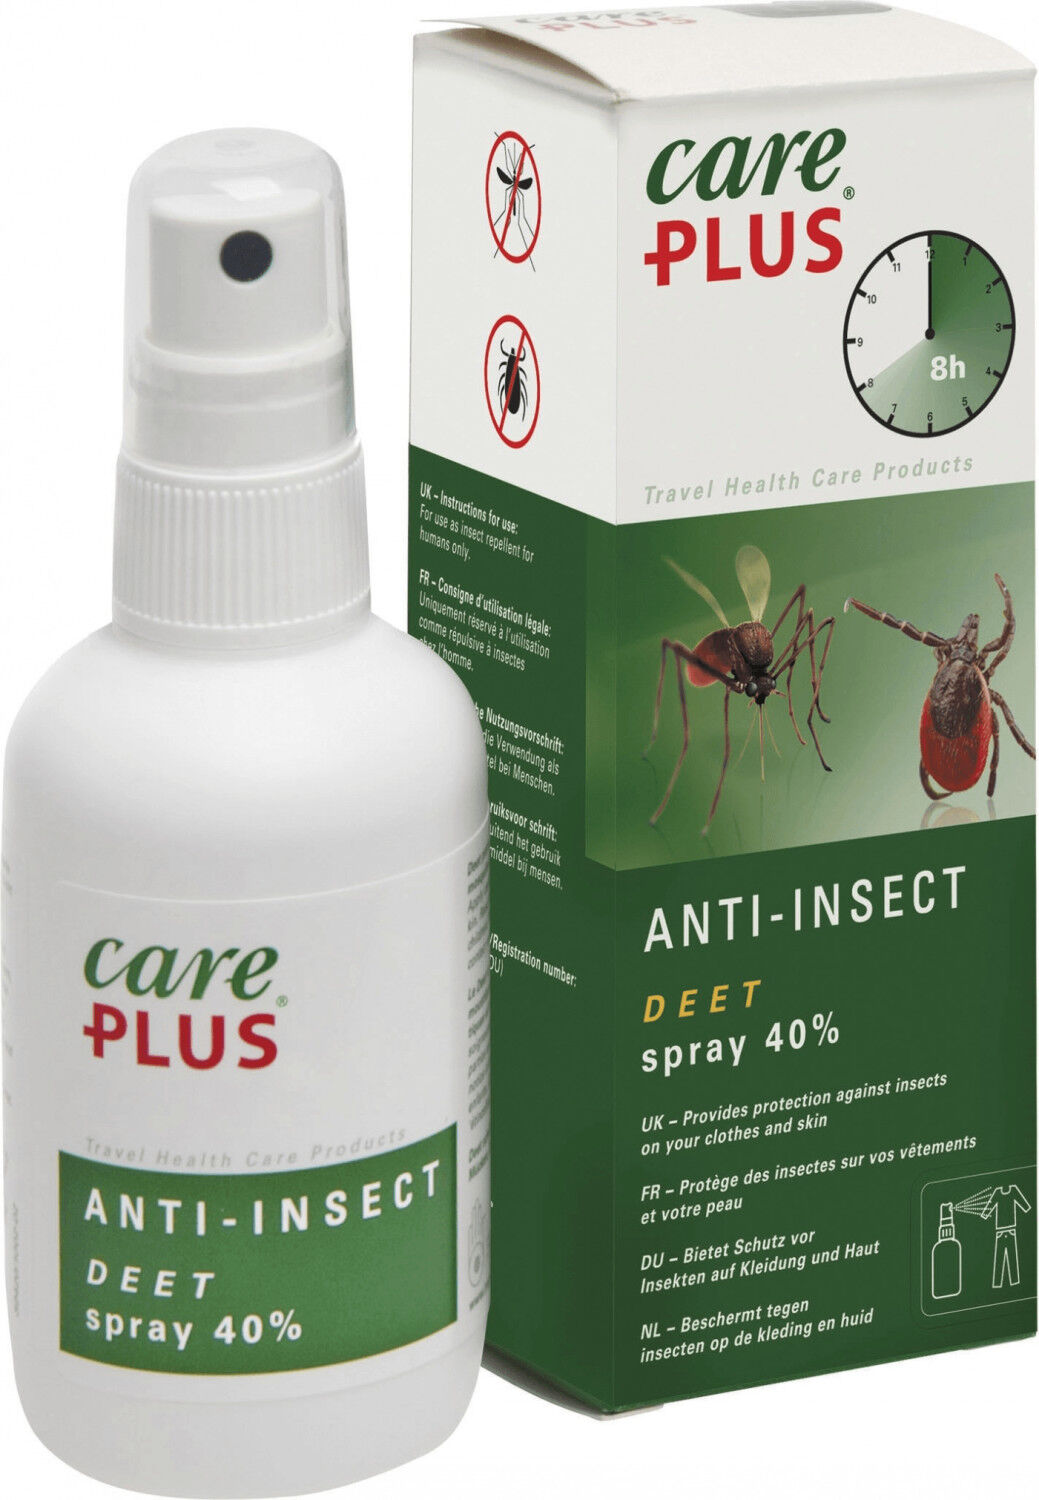 Care Plus Anti-Insect - Deet spray 40% - Hyönteismyrkky